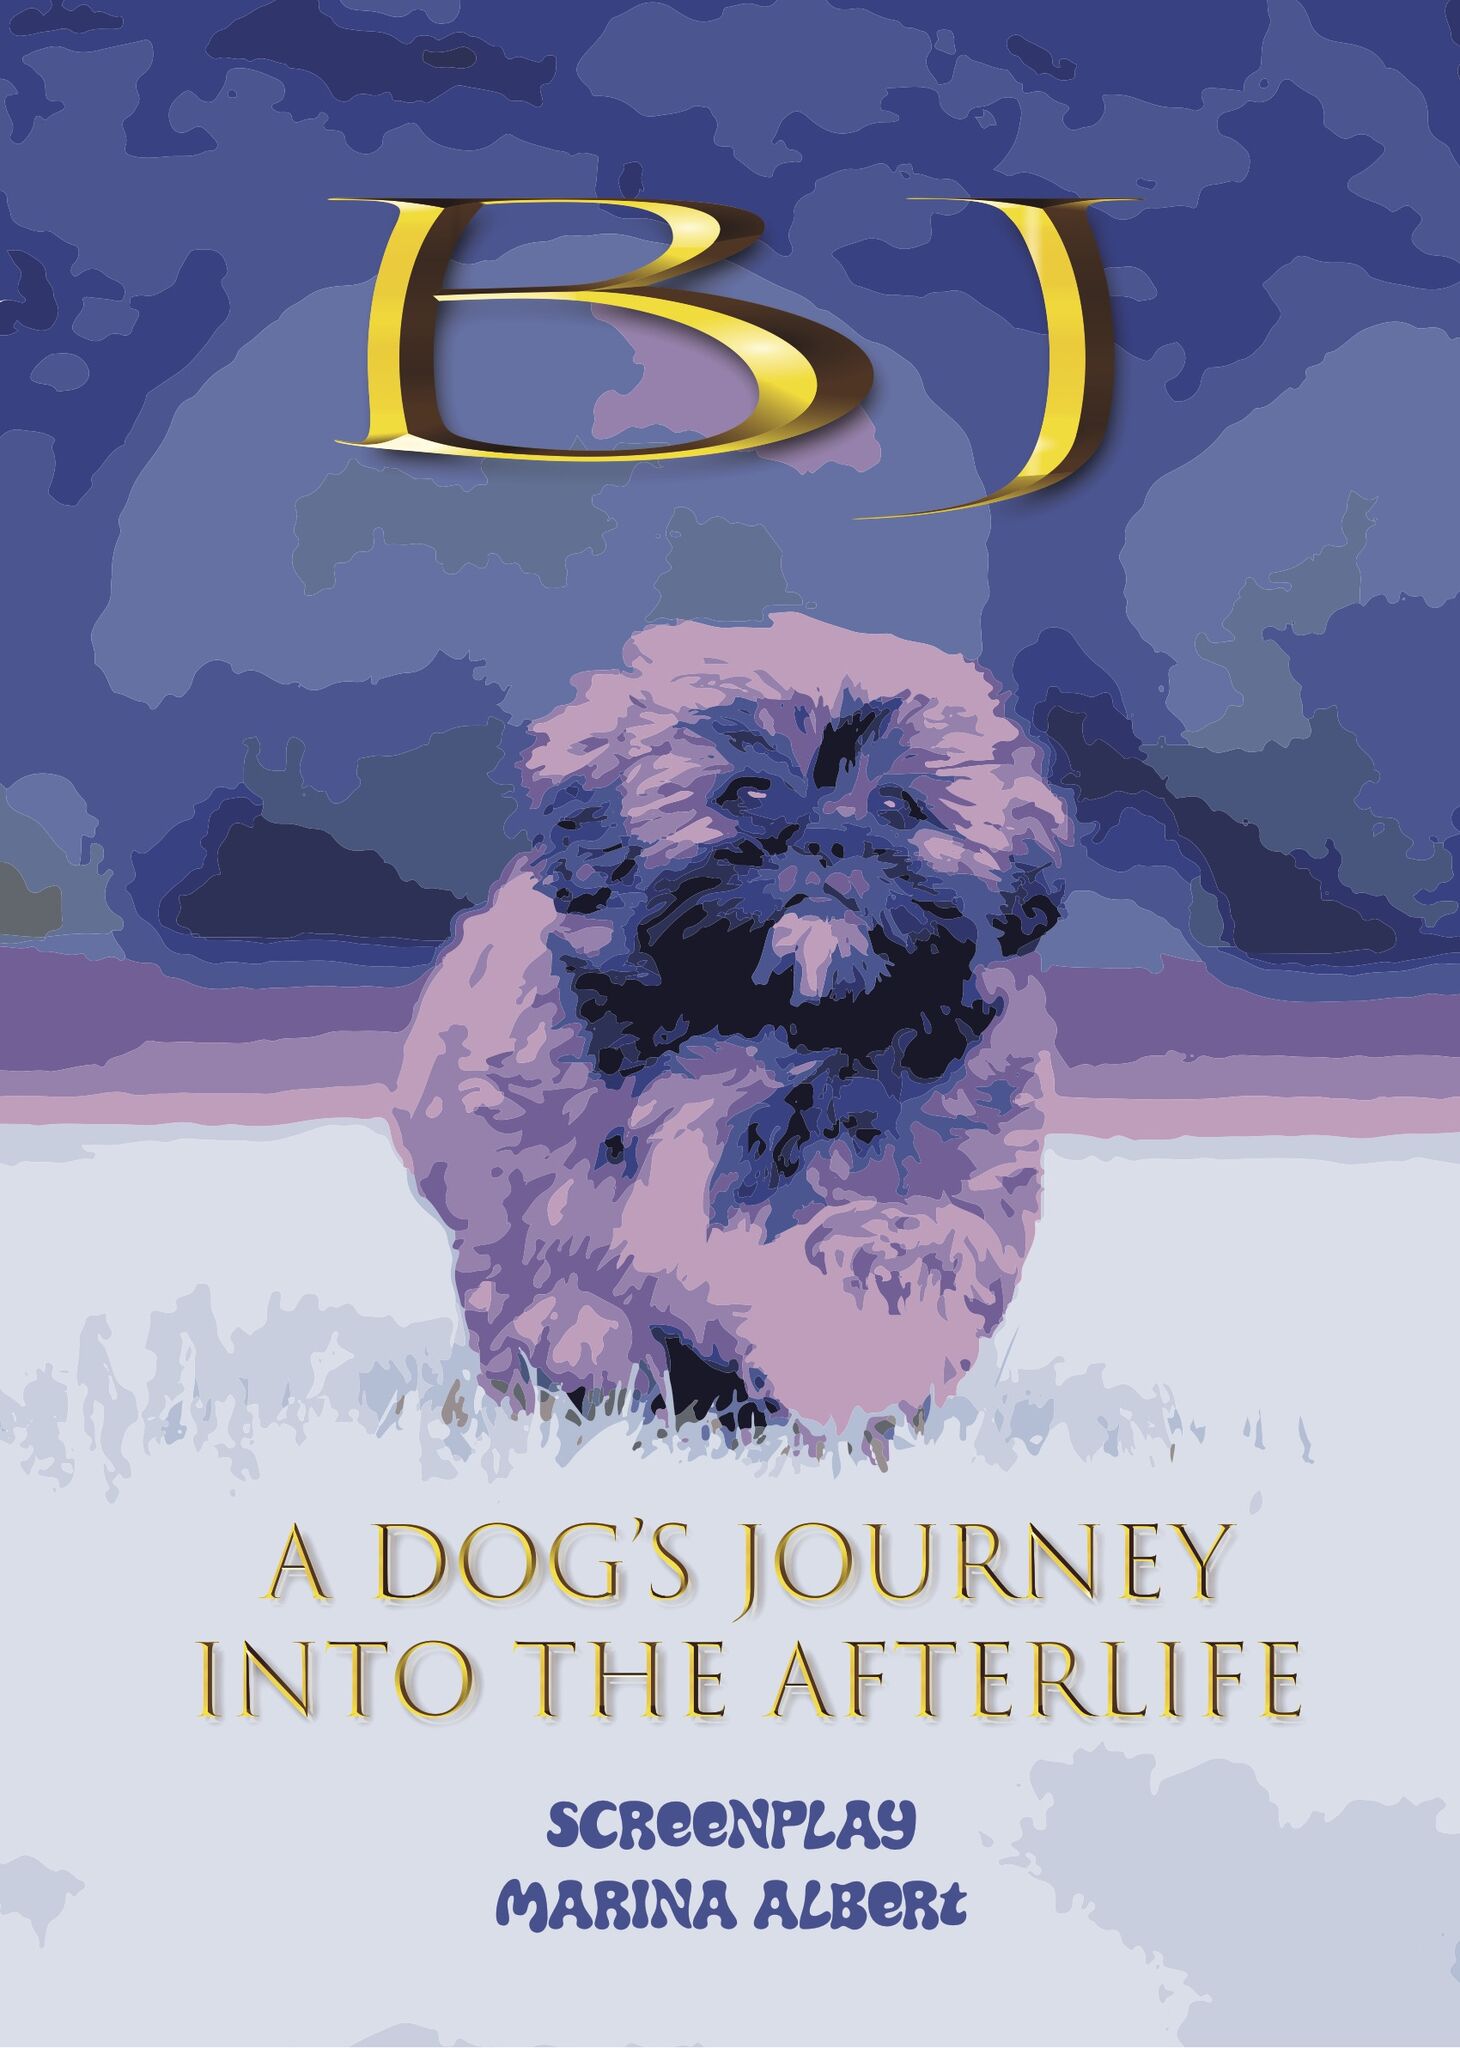 BJ: A DOG'S JOURNEY INTO THE AFTERLIFE